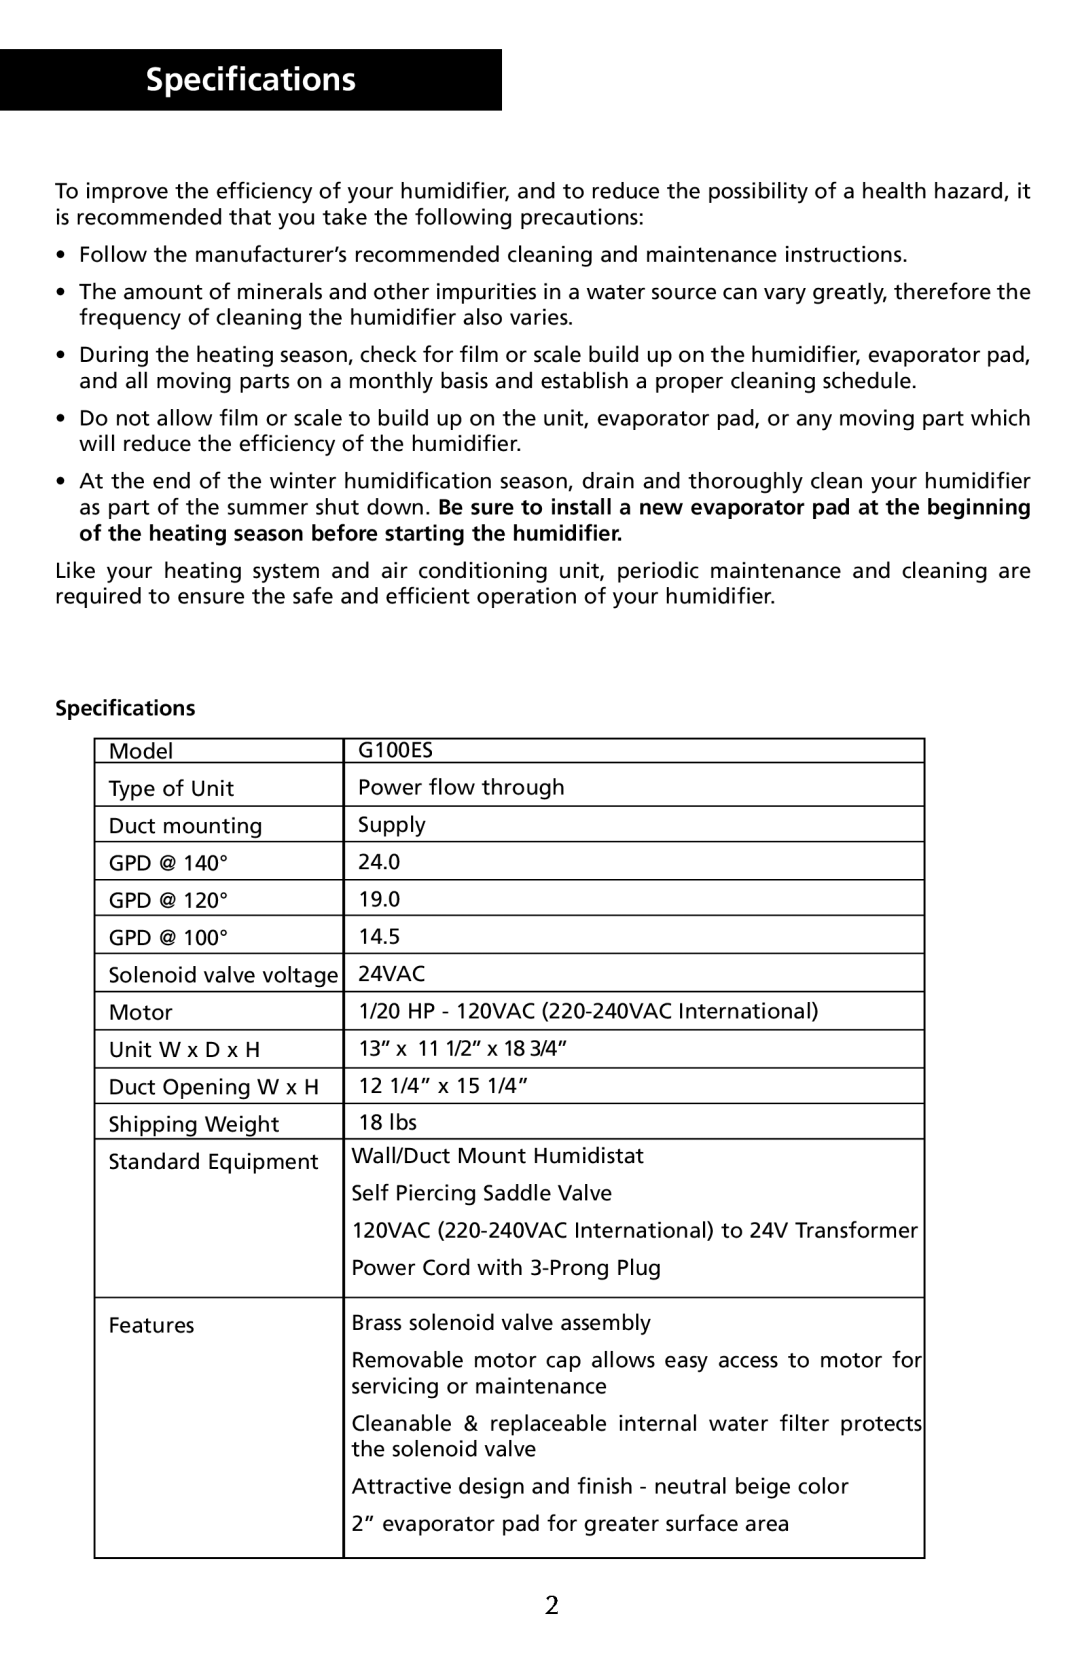 Herrmidifier Co G-100ES manual Specifications 